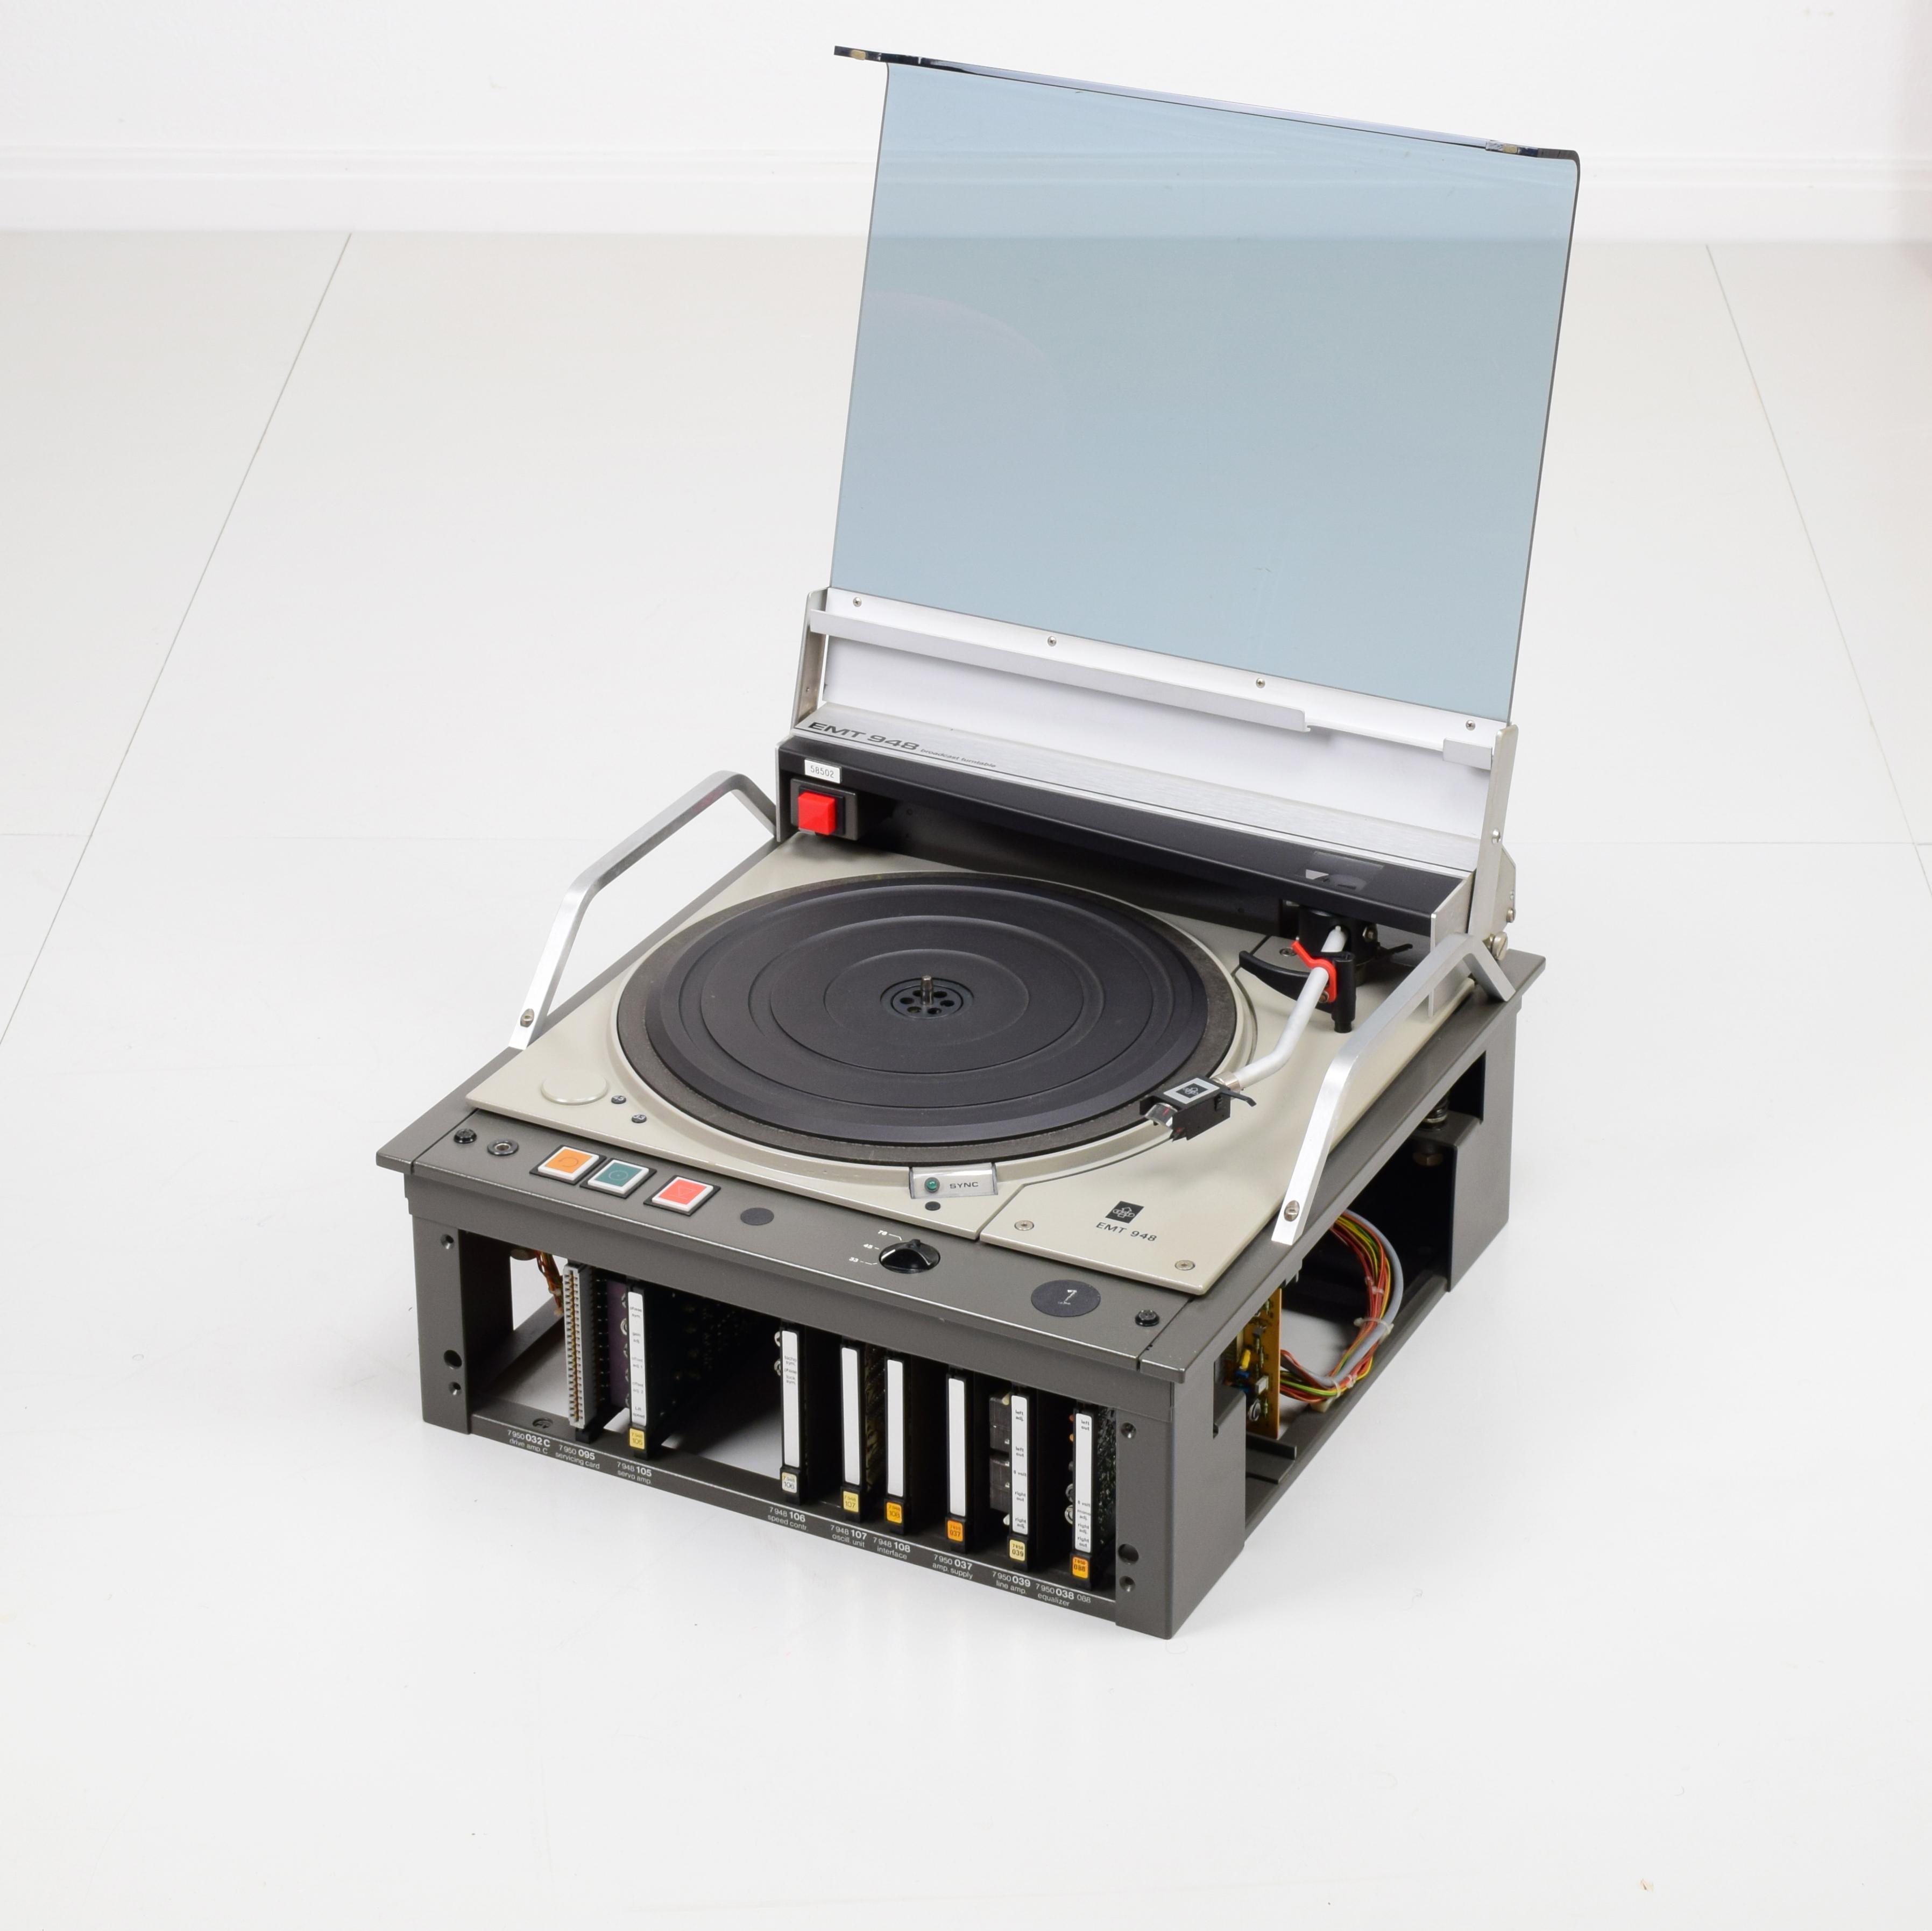 Emt 948 Turntable. Superb, Complete and Ready to Use, Looks and Sounds Fantastic 2